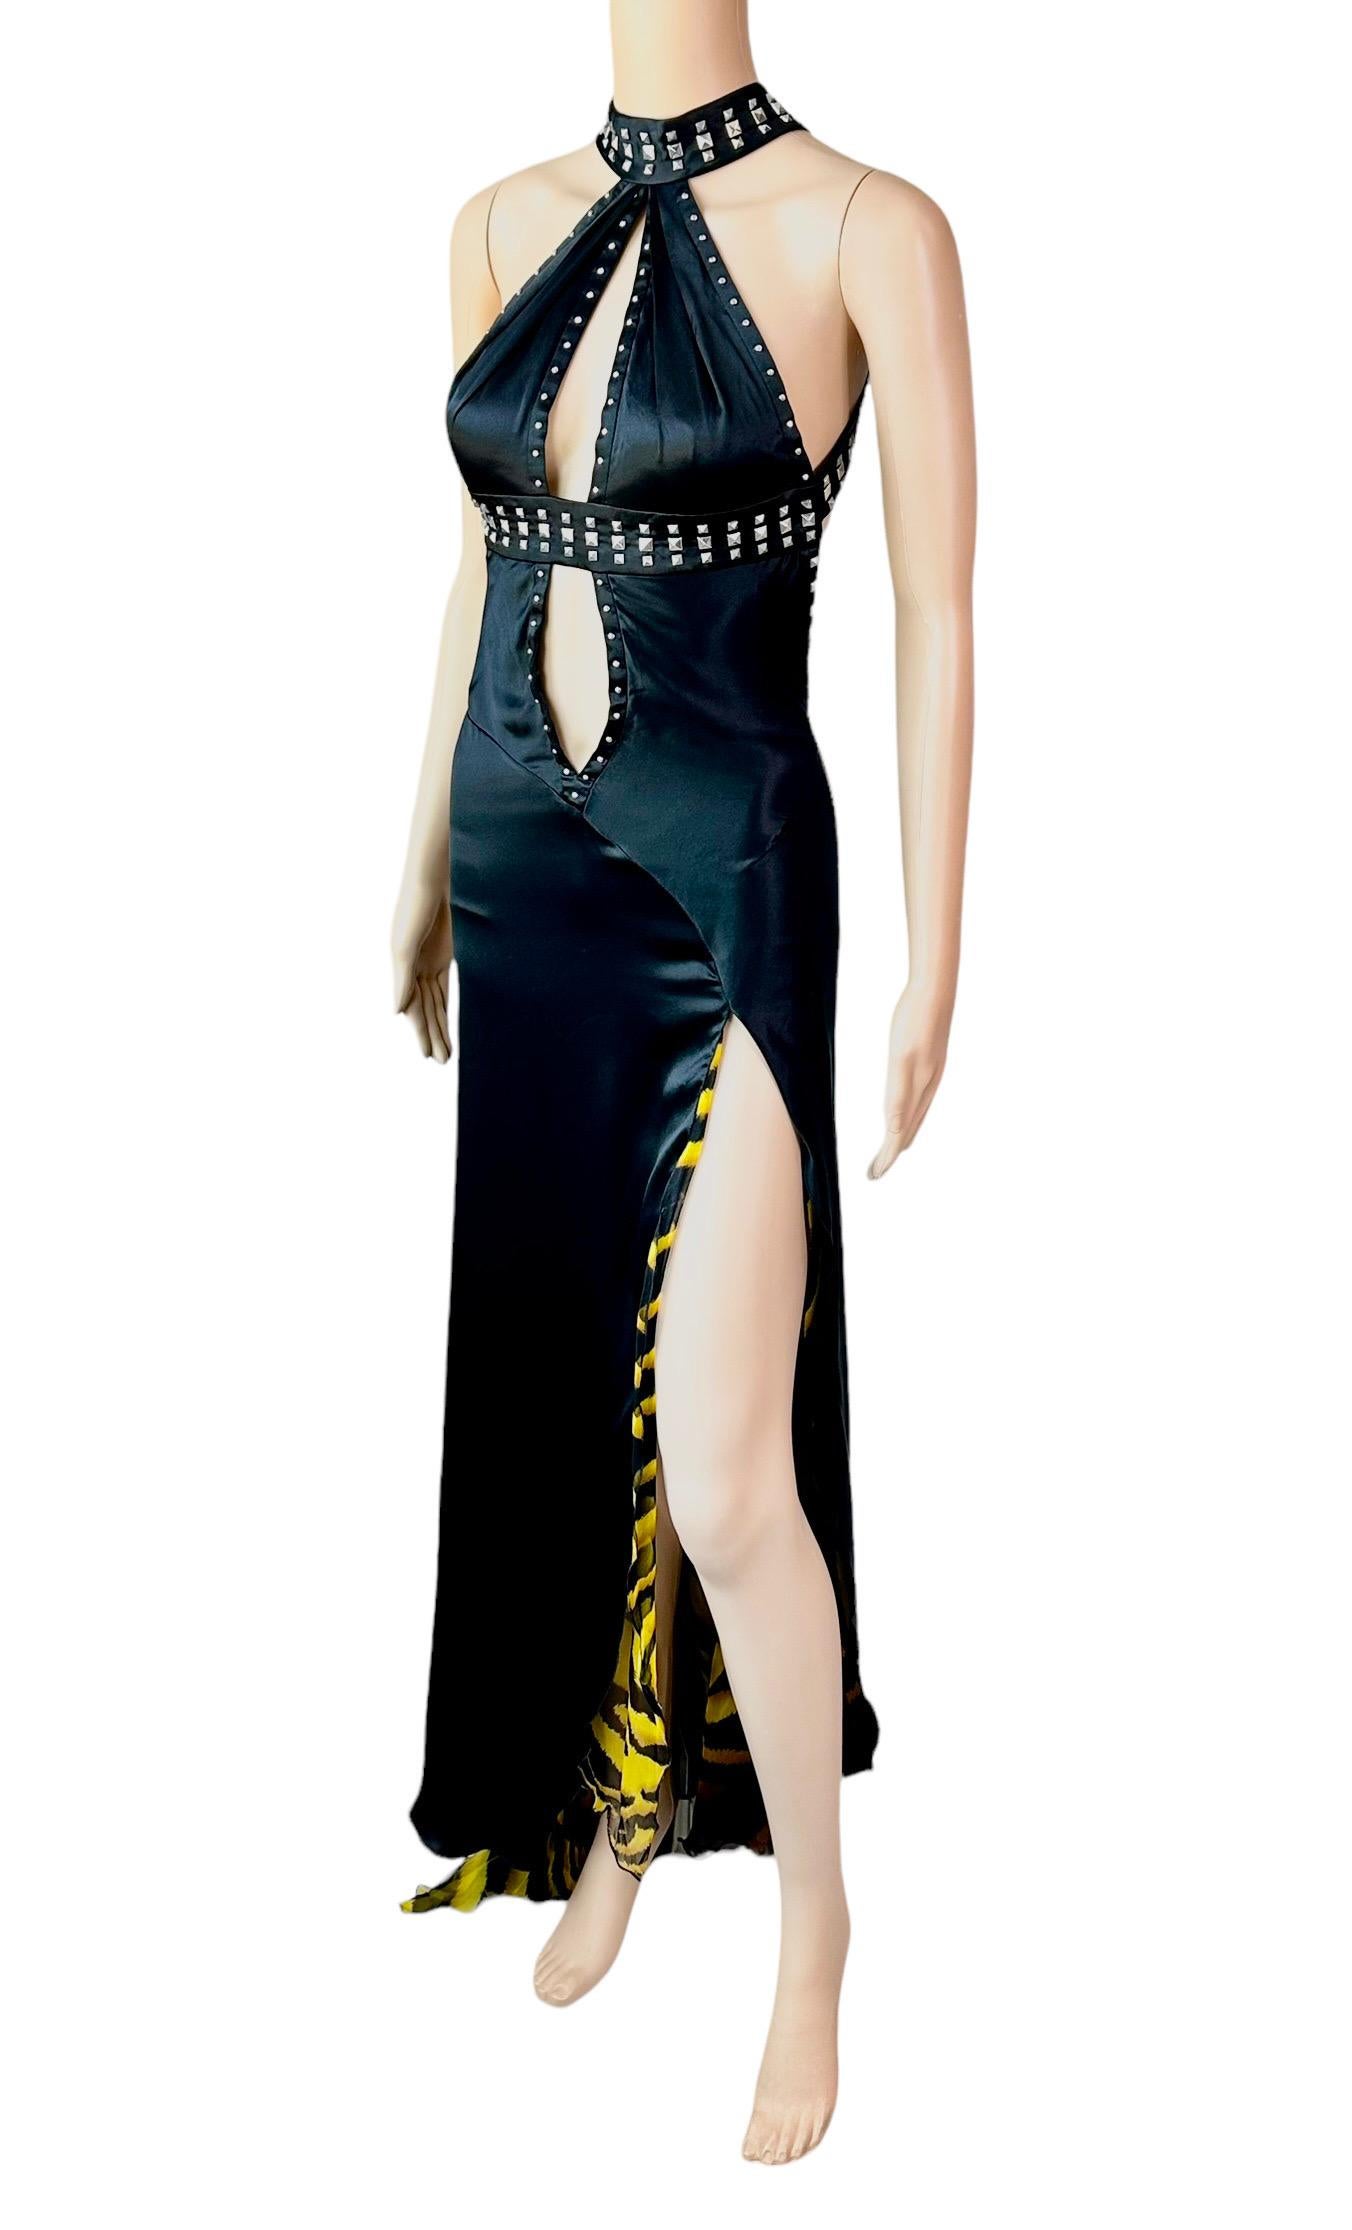 Black Versace F/W 2004 Runway Studded Plunging Keyhole Neckline Evening Dress Gown For Sale